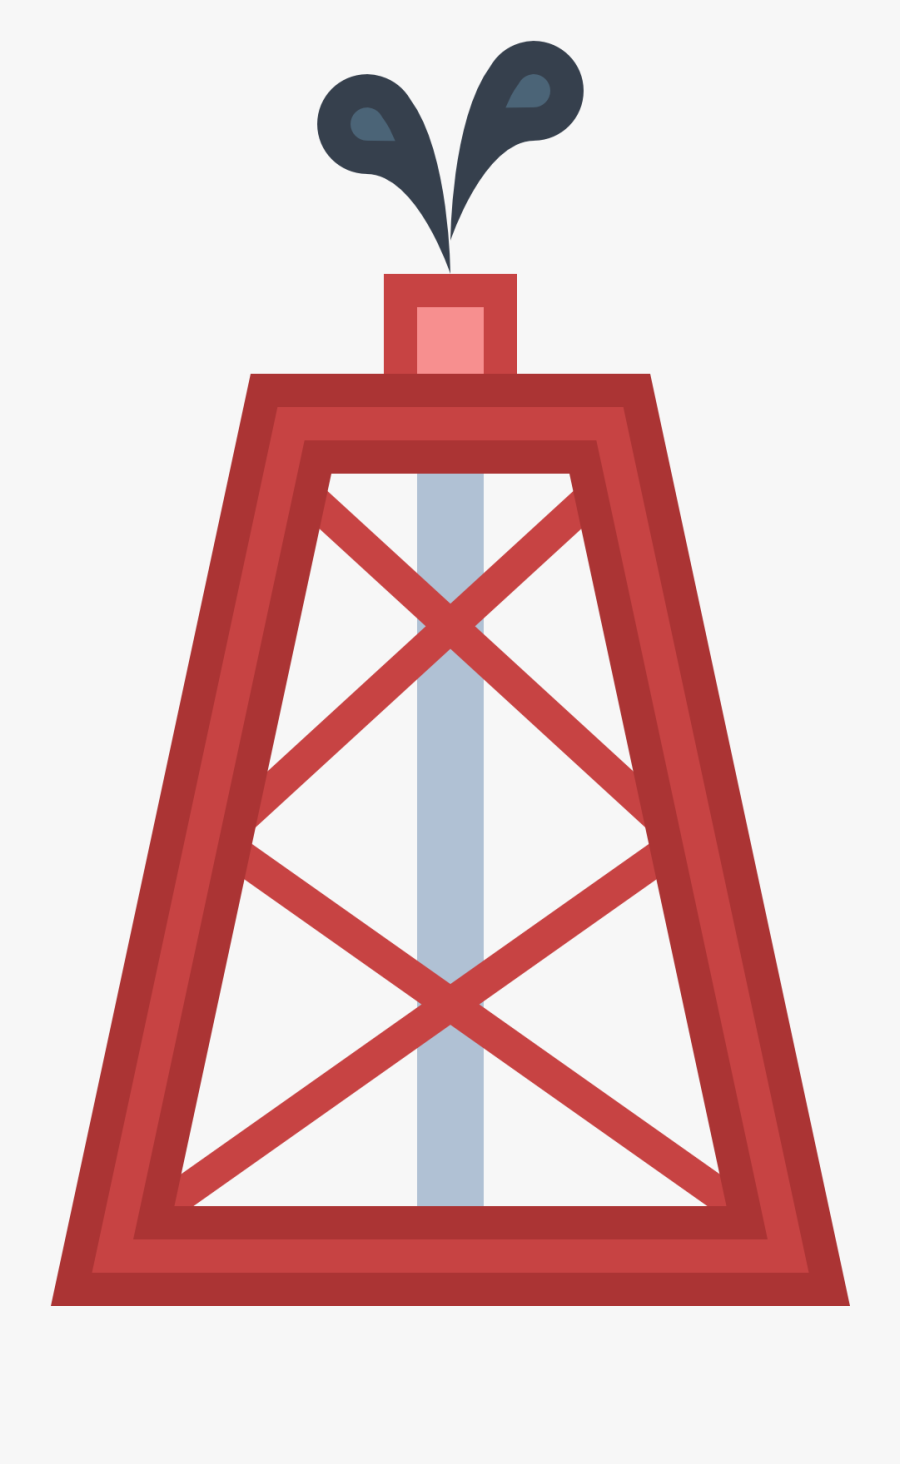 V - 4 - 9 75 - 7 Kb - Oil Platform - Type Max - Oil And Gas Icon Png, Transparent Clipart